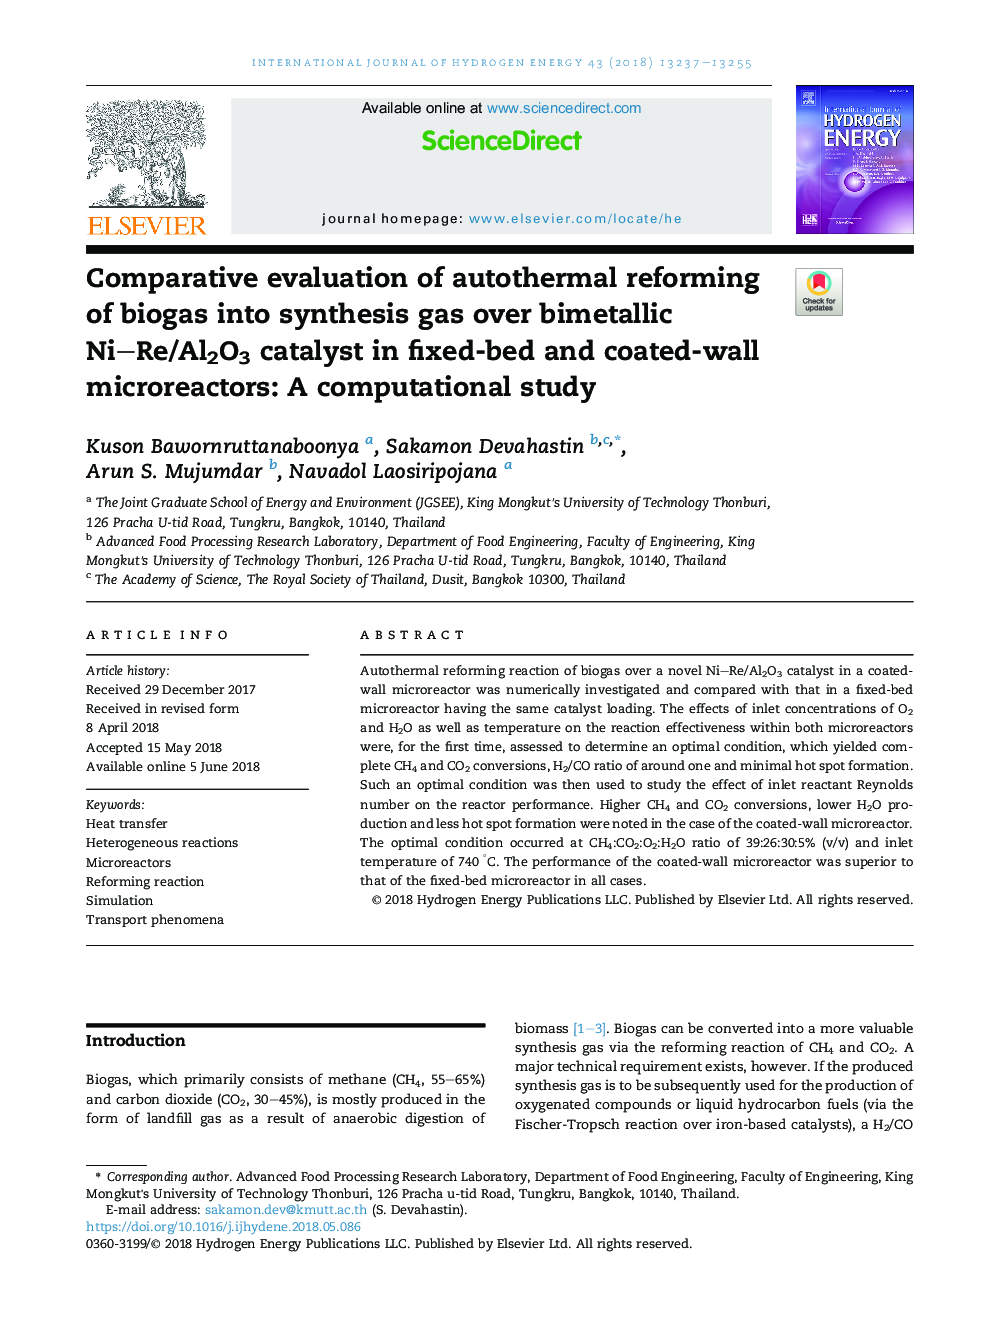 Comparative evaluation of autothermal reforming of biogas into synthesis gas over bimetallic NiRe/Al2O3 catalyst in fixed-bed and coated-wall microreactors: A computational study